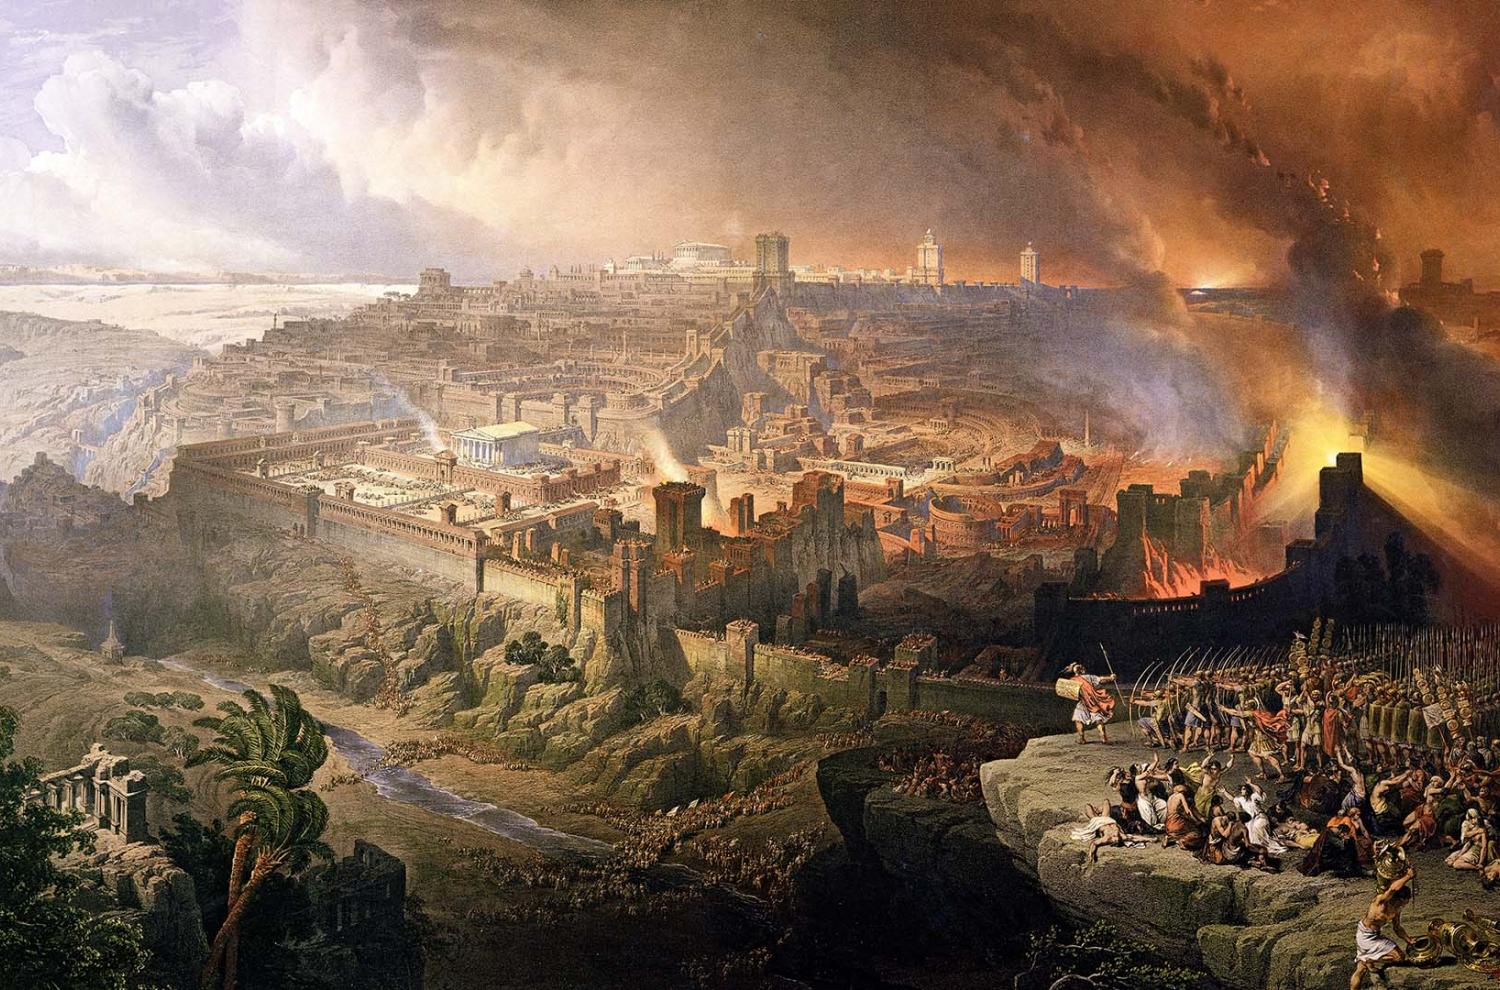 The Siege and Destruction of Jerusalem by the Romans Under the Command of Titus, A.D. 70. Painting by David Roberts, 1850 via Wikimedia Commons.